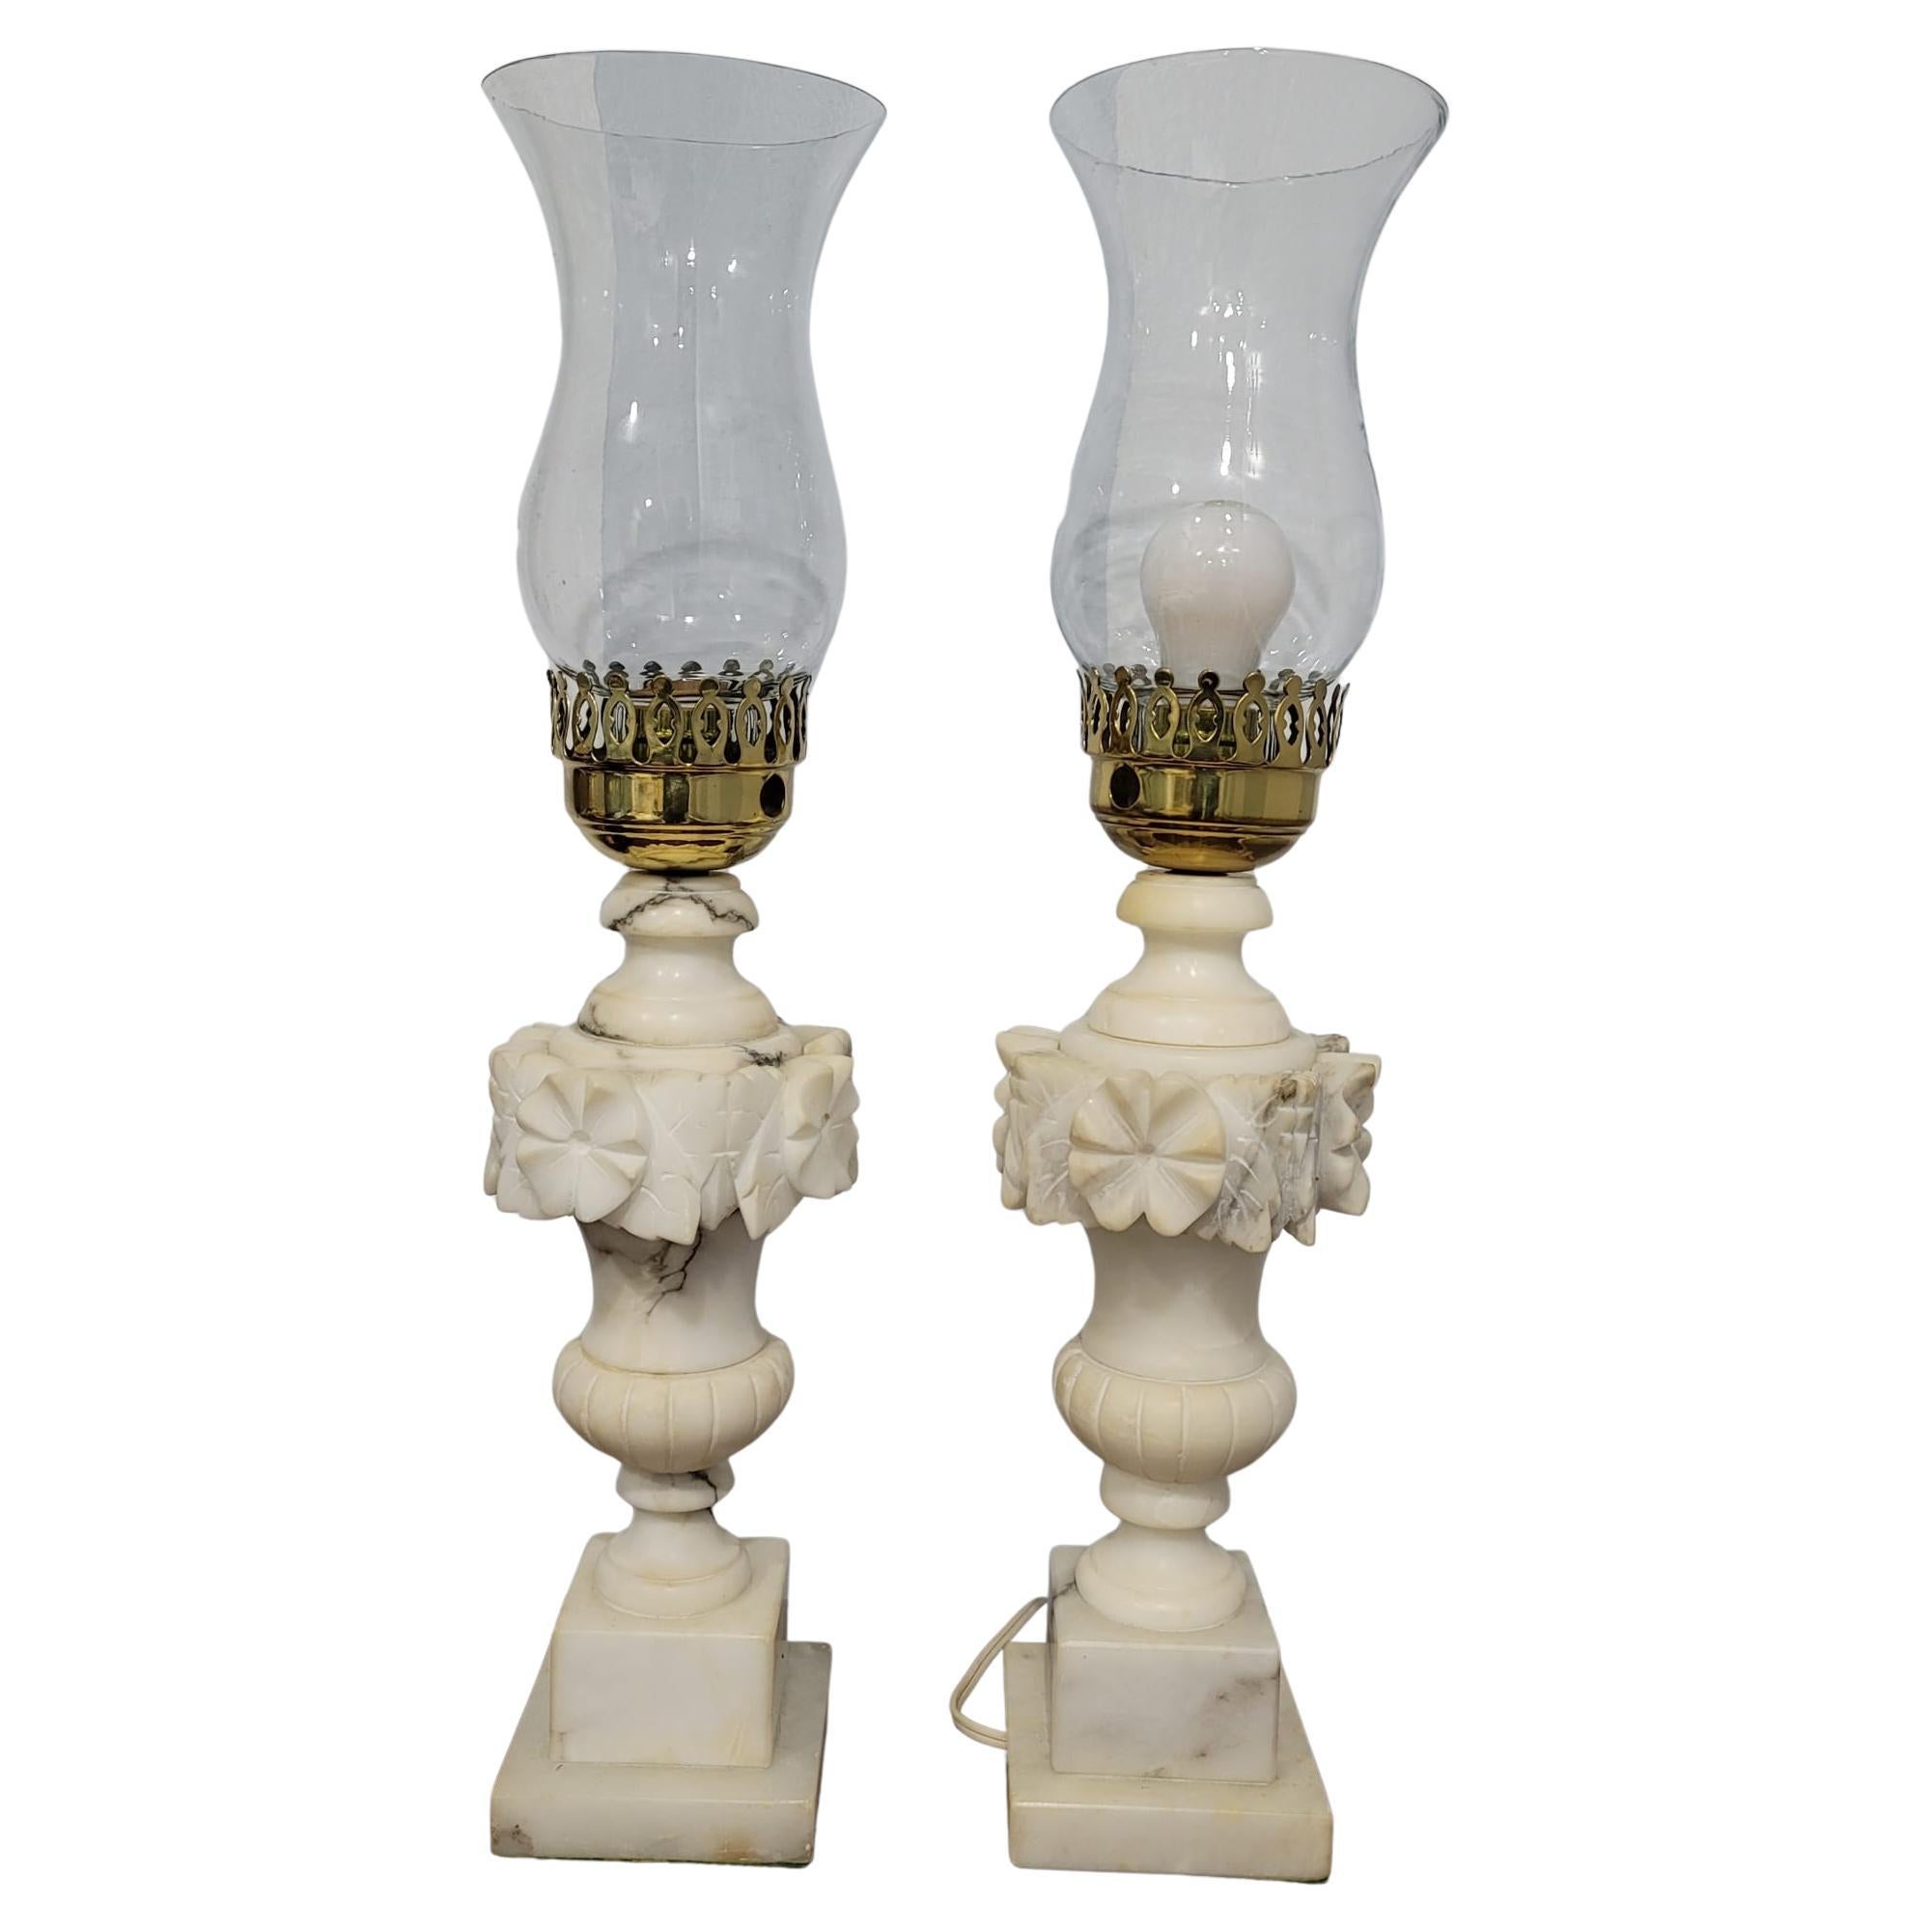 Pair of Vintage Italian Marble Lantern Table Lamps, Circa 1960s For Sale